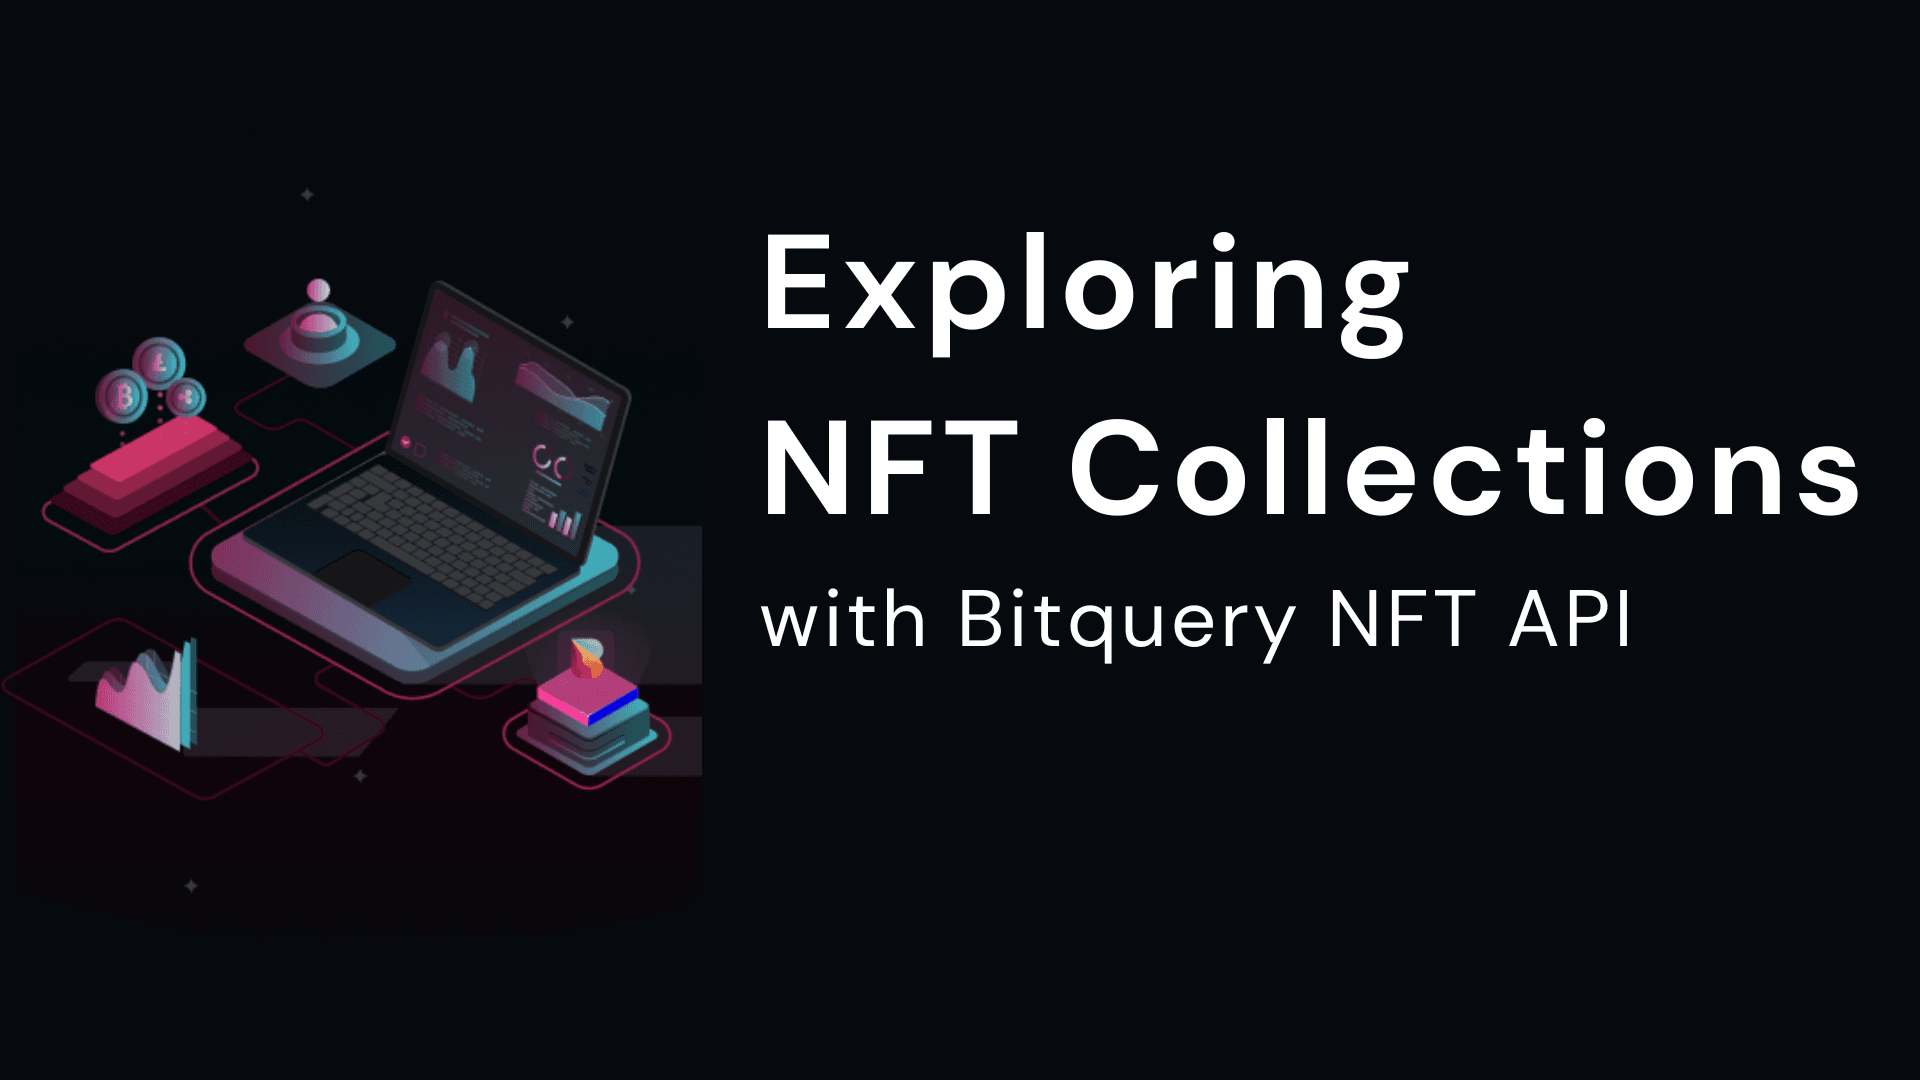 Cover Image for Explore NFT Collections with Bitquery's API